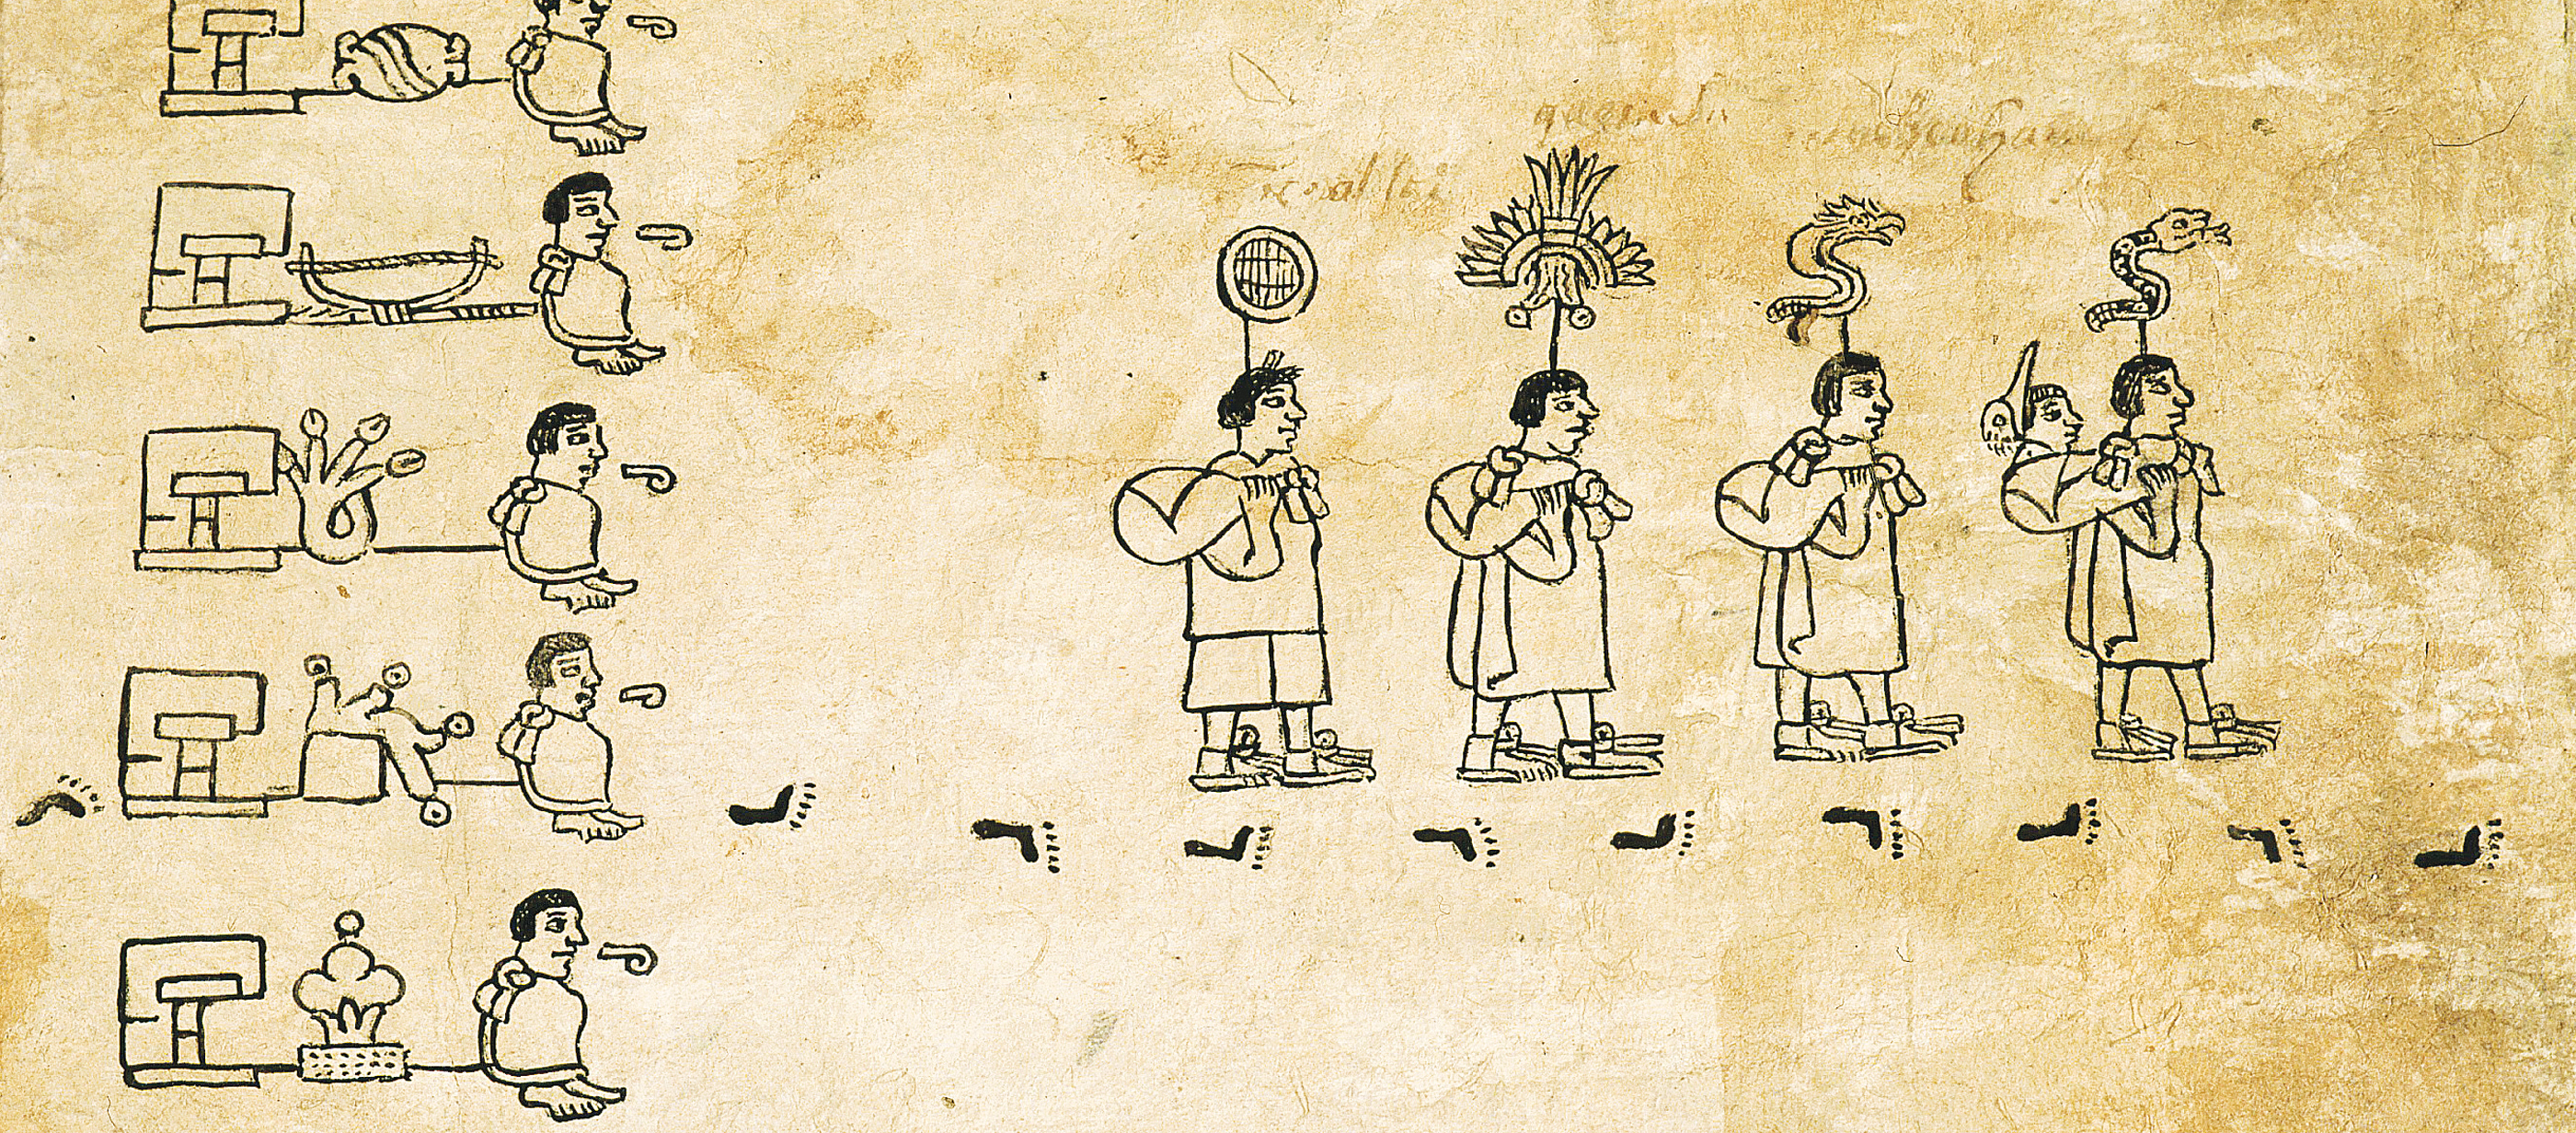 Aztecs’ long march, from the Boturini Codex, c. 1540. National Museum of Anthropology, Mexico City, Mexico. 